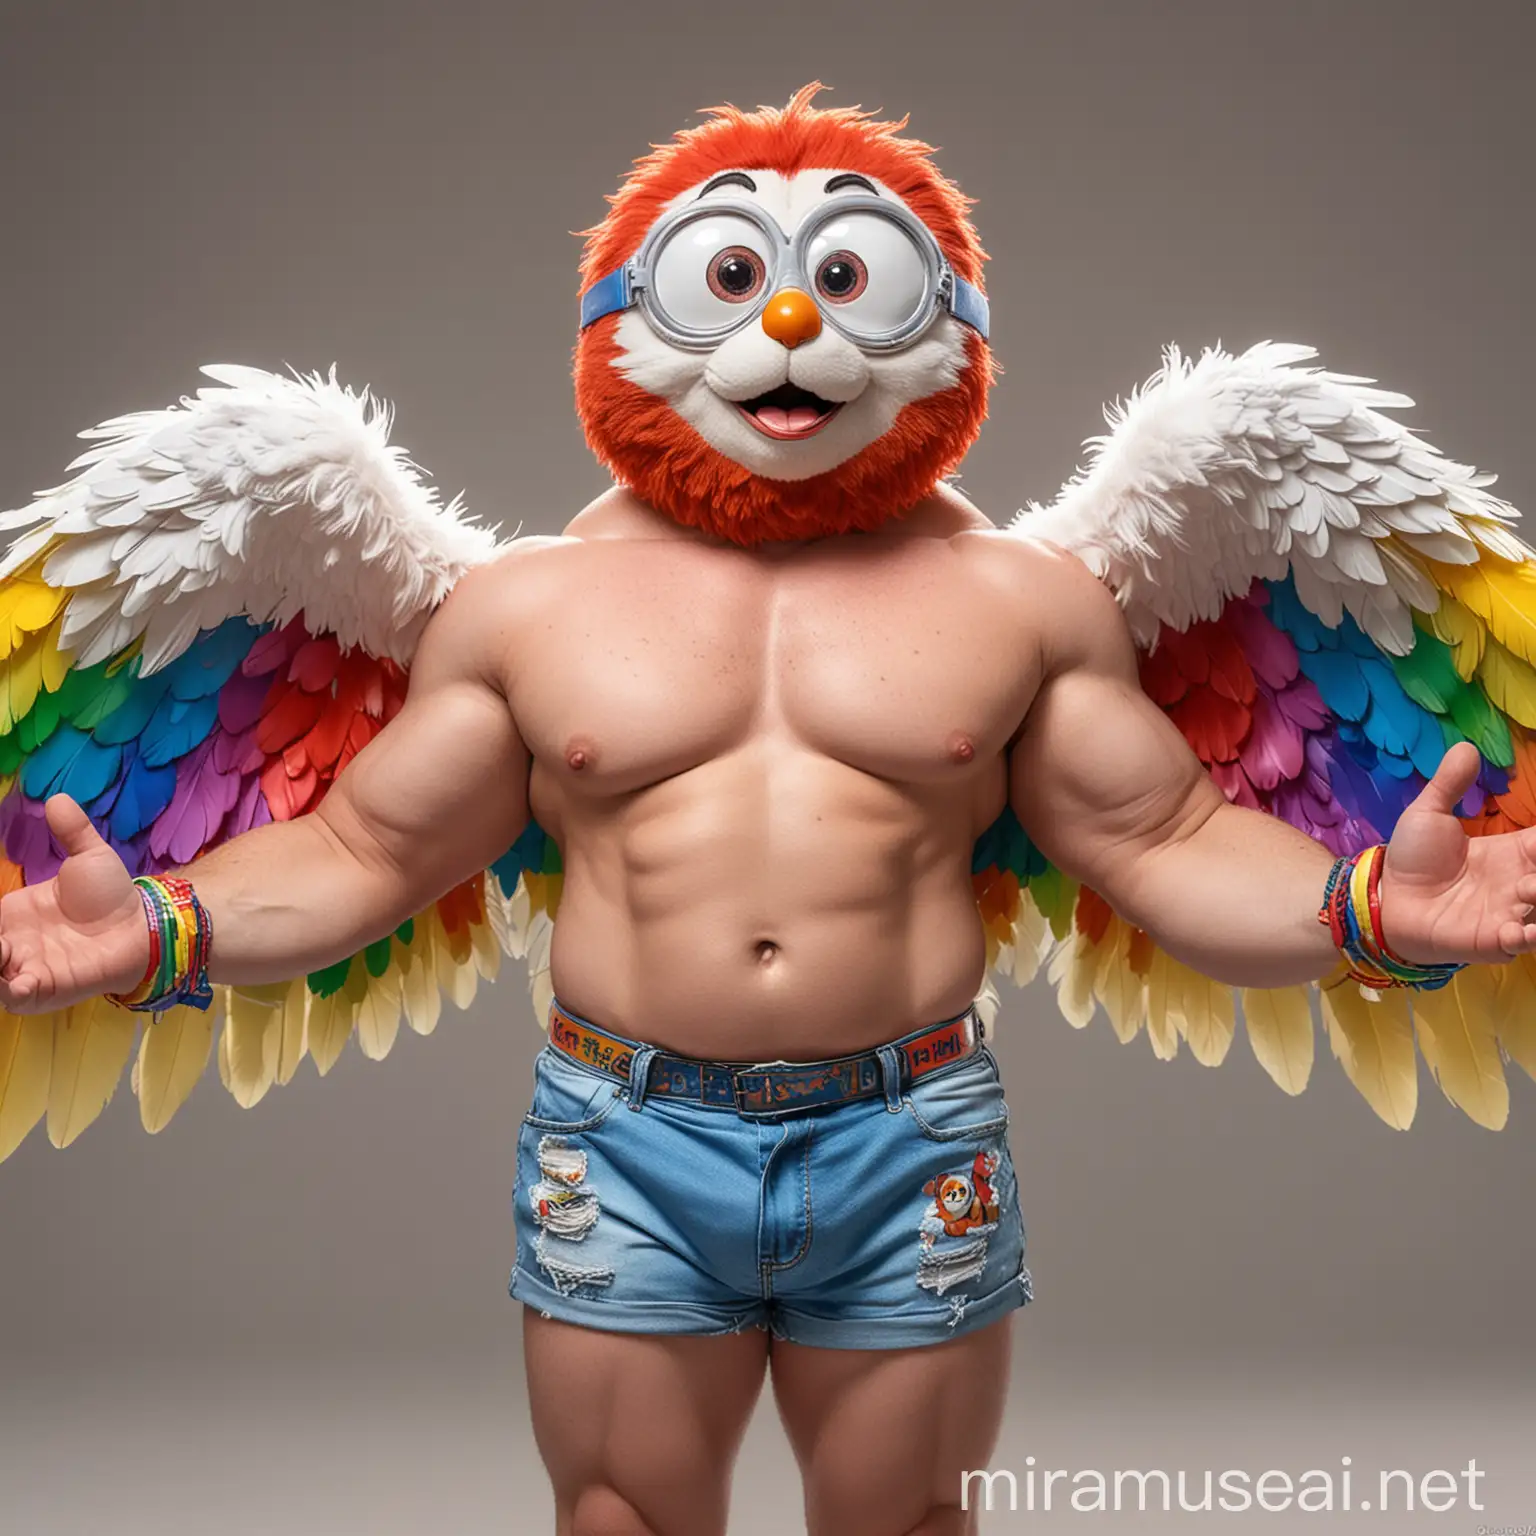 Muscular Redhead Bodybuilder Flexing with Rainbow Eagle Wings Jacket